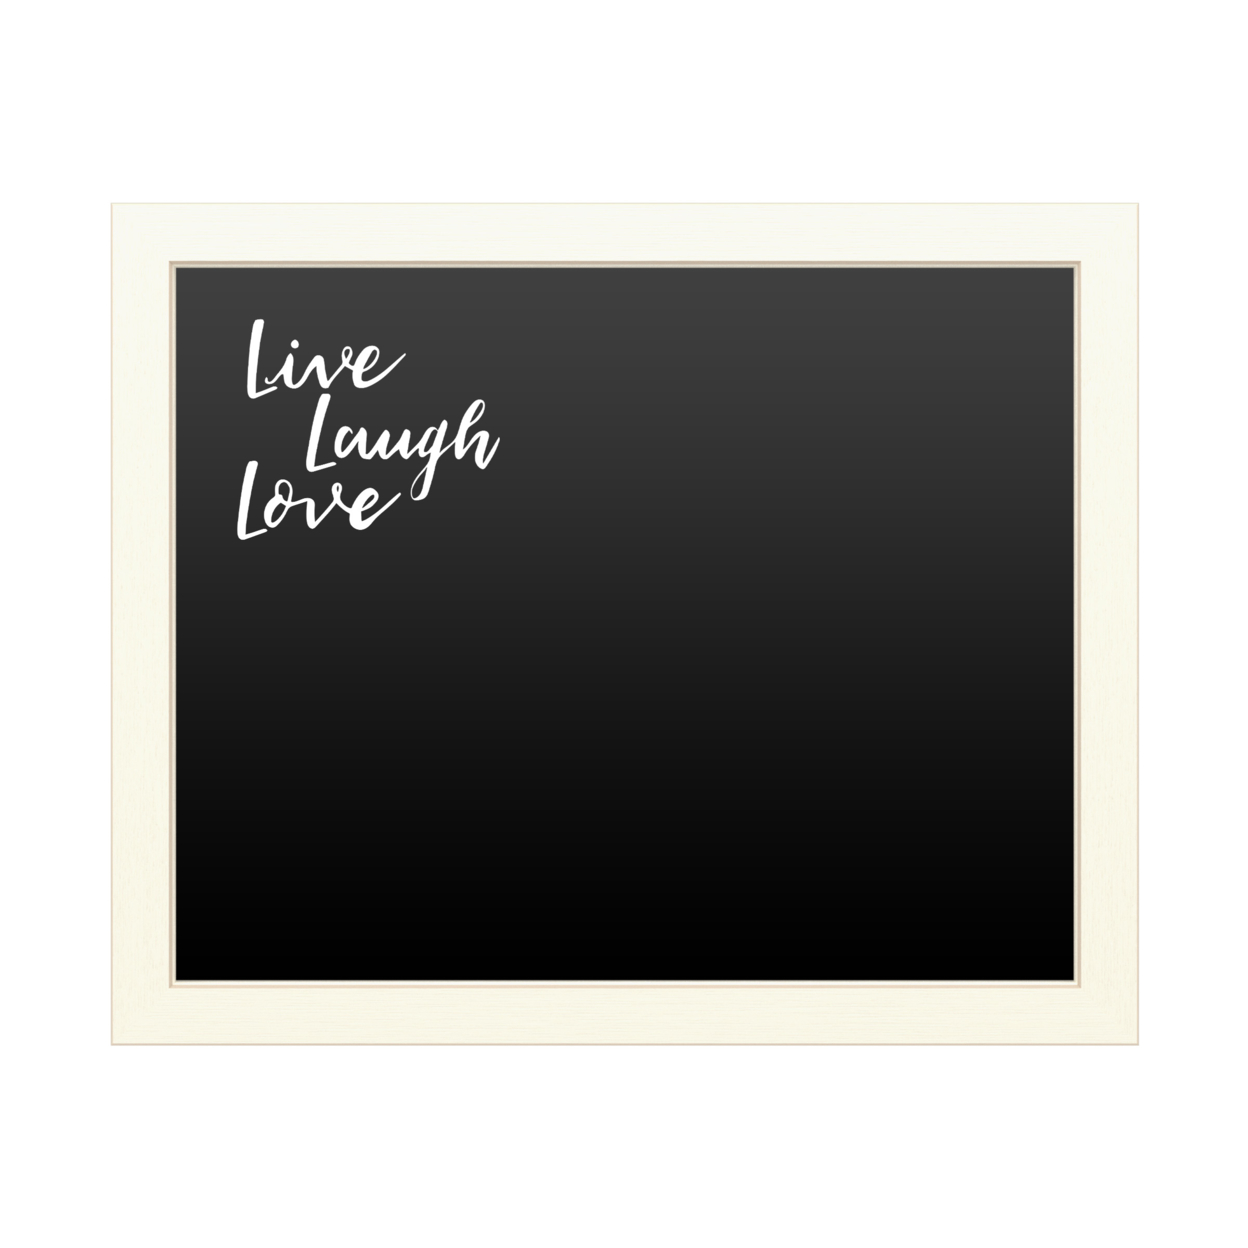 16 X 20 Chalk Board With Printed Artwork - Live Laugh Love White Board - Ready To Hang Chalkboard